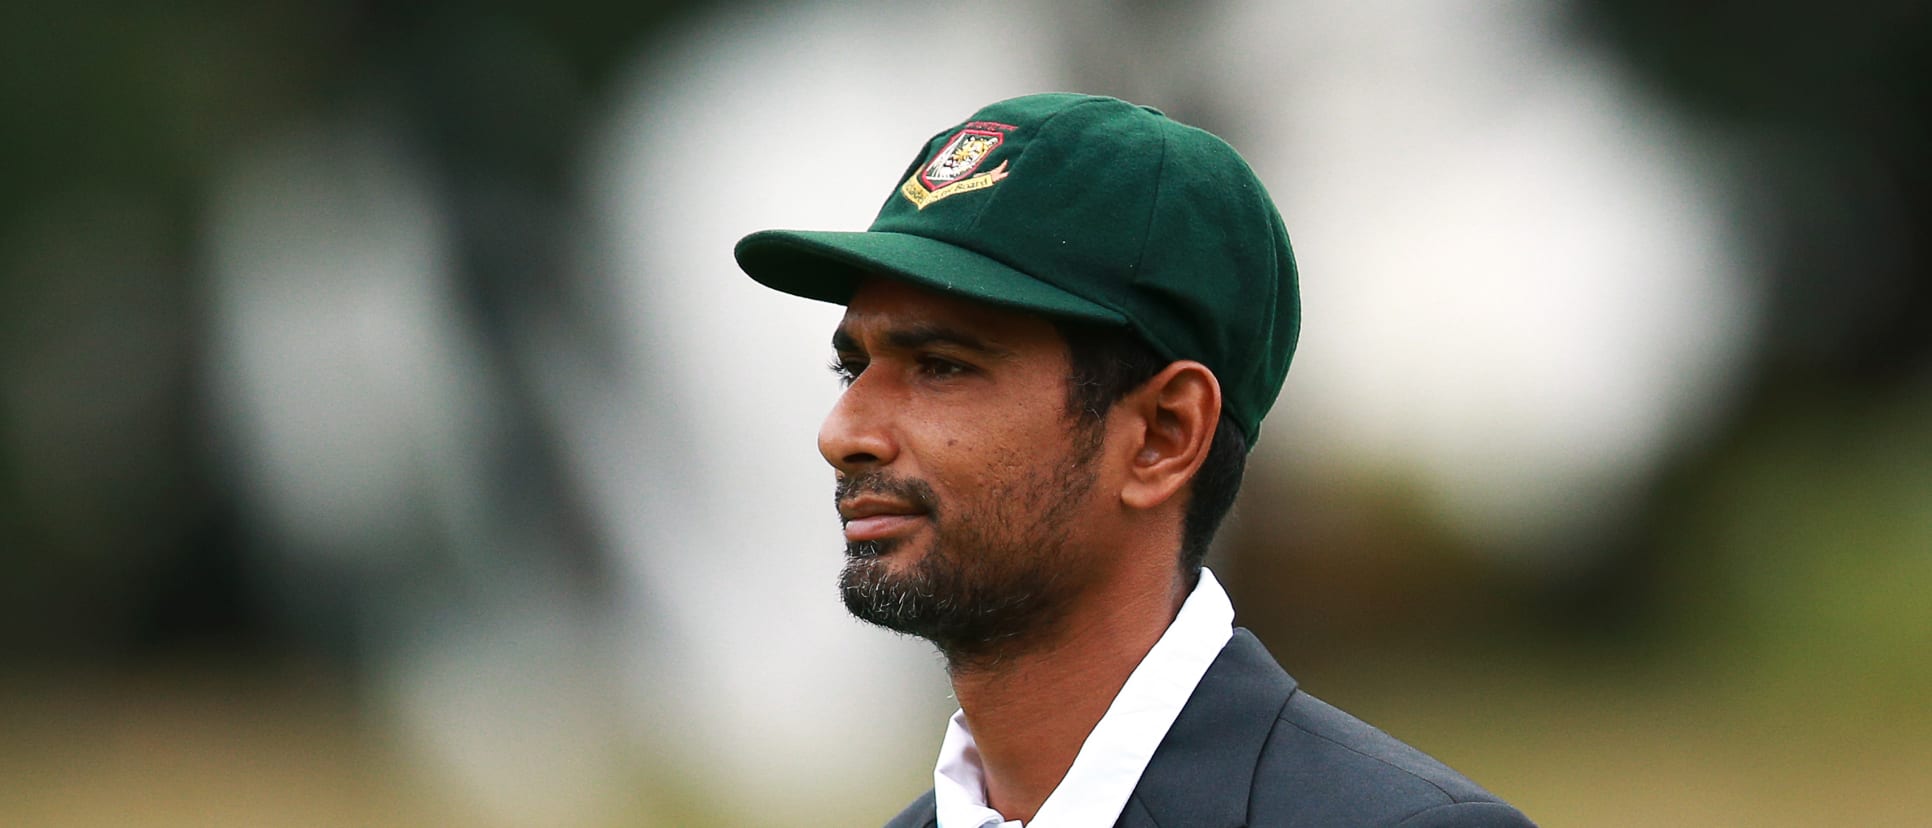 Mahmudullah is still nursing a shoulder injury that was aggravated on the New Zealand tour